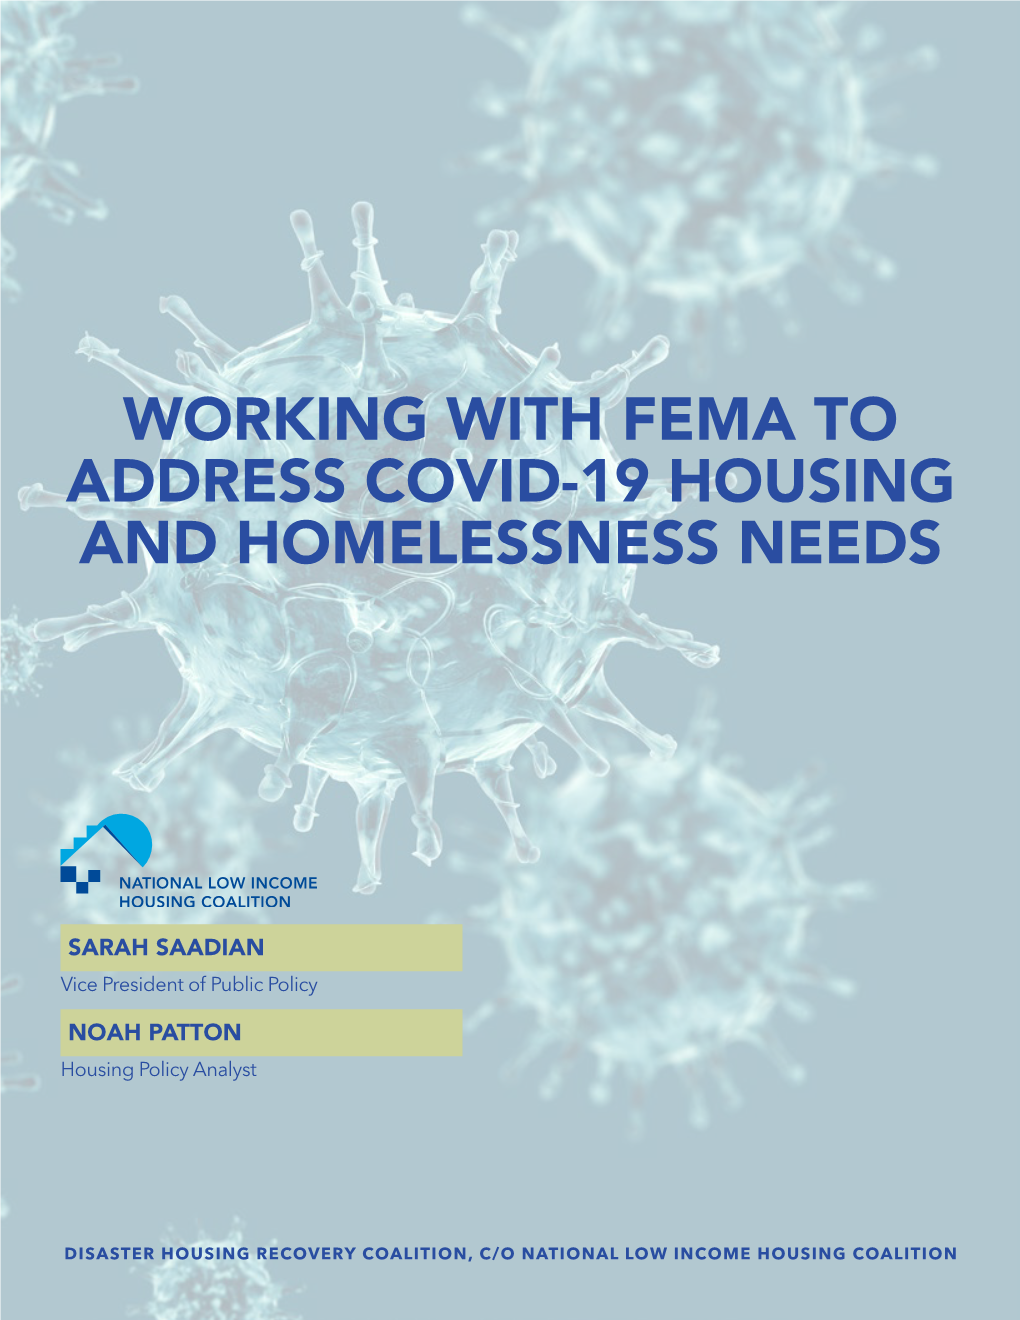 Working with Fema to Address Covid-19 Housing and Homelessness Needs